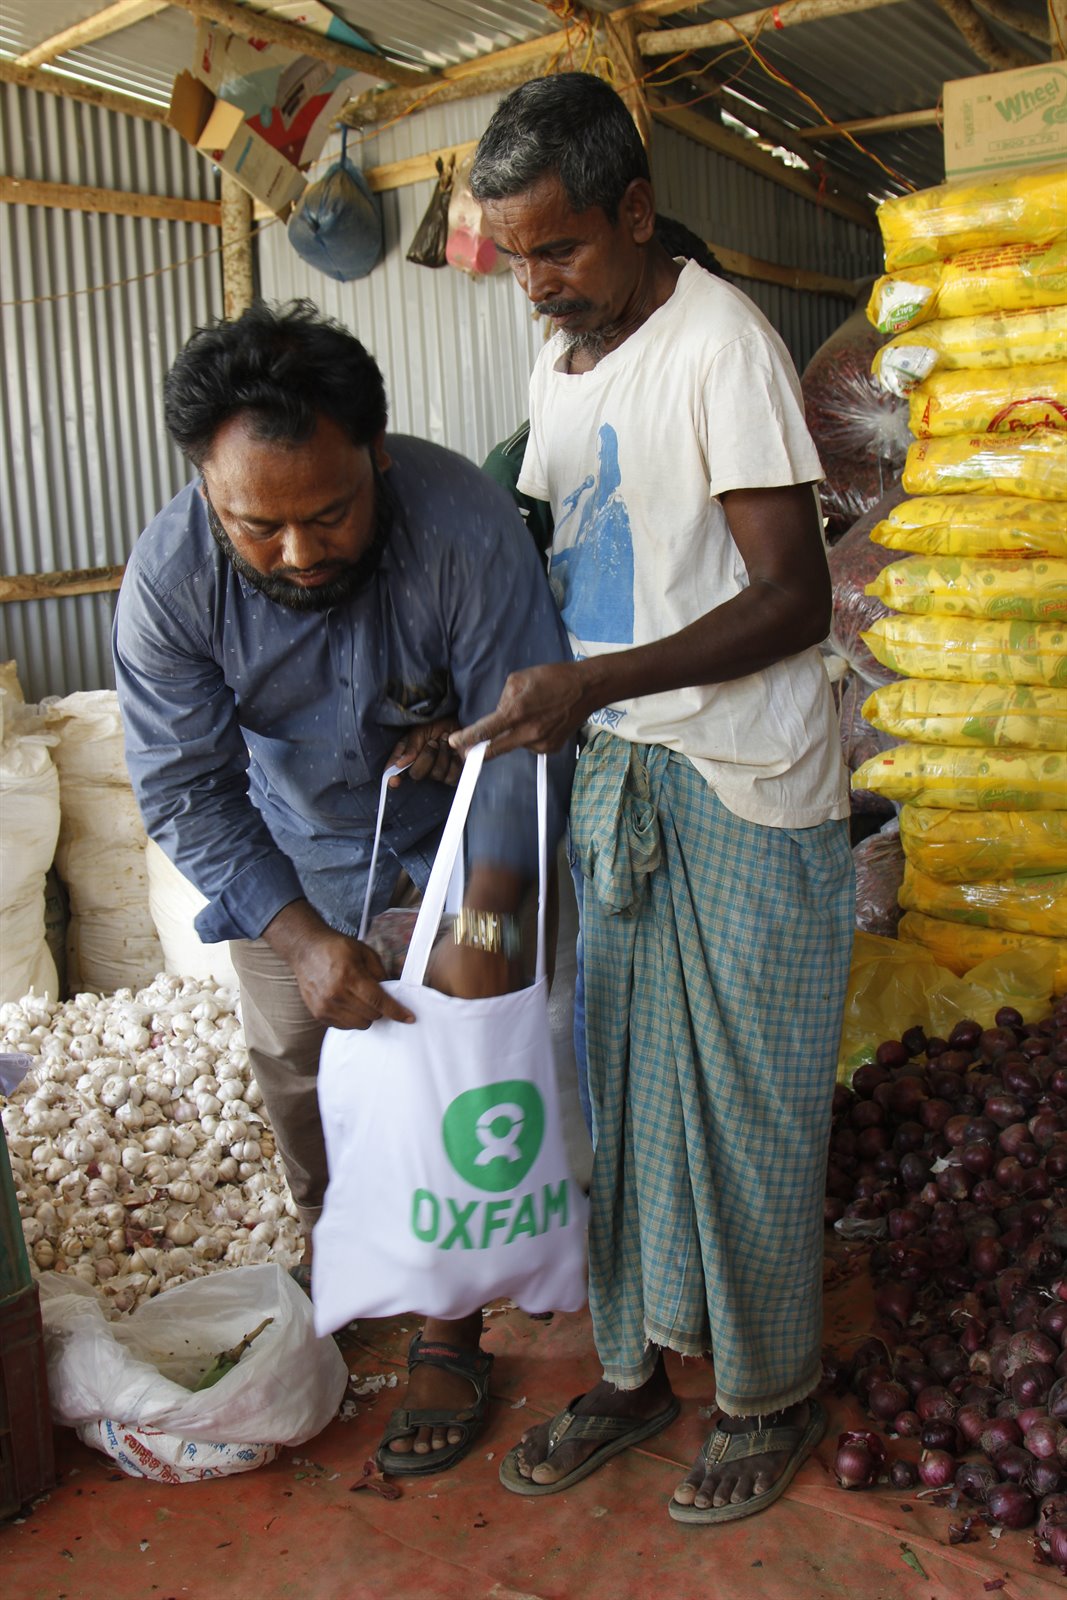 180430_Bangladeshi store keeper MD Ruhulamin packs fresh veges & spices bought with Oxfam cash vouchers for Rohingya refugee Kefayatullah.JPG